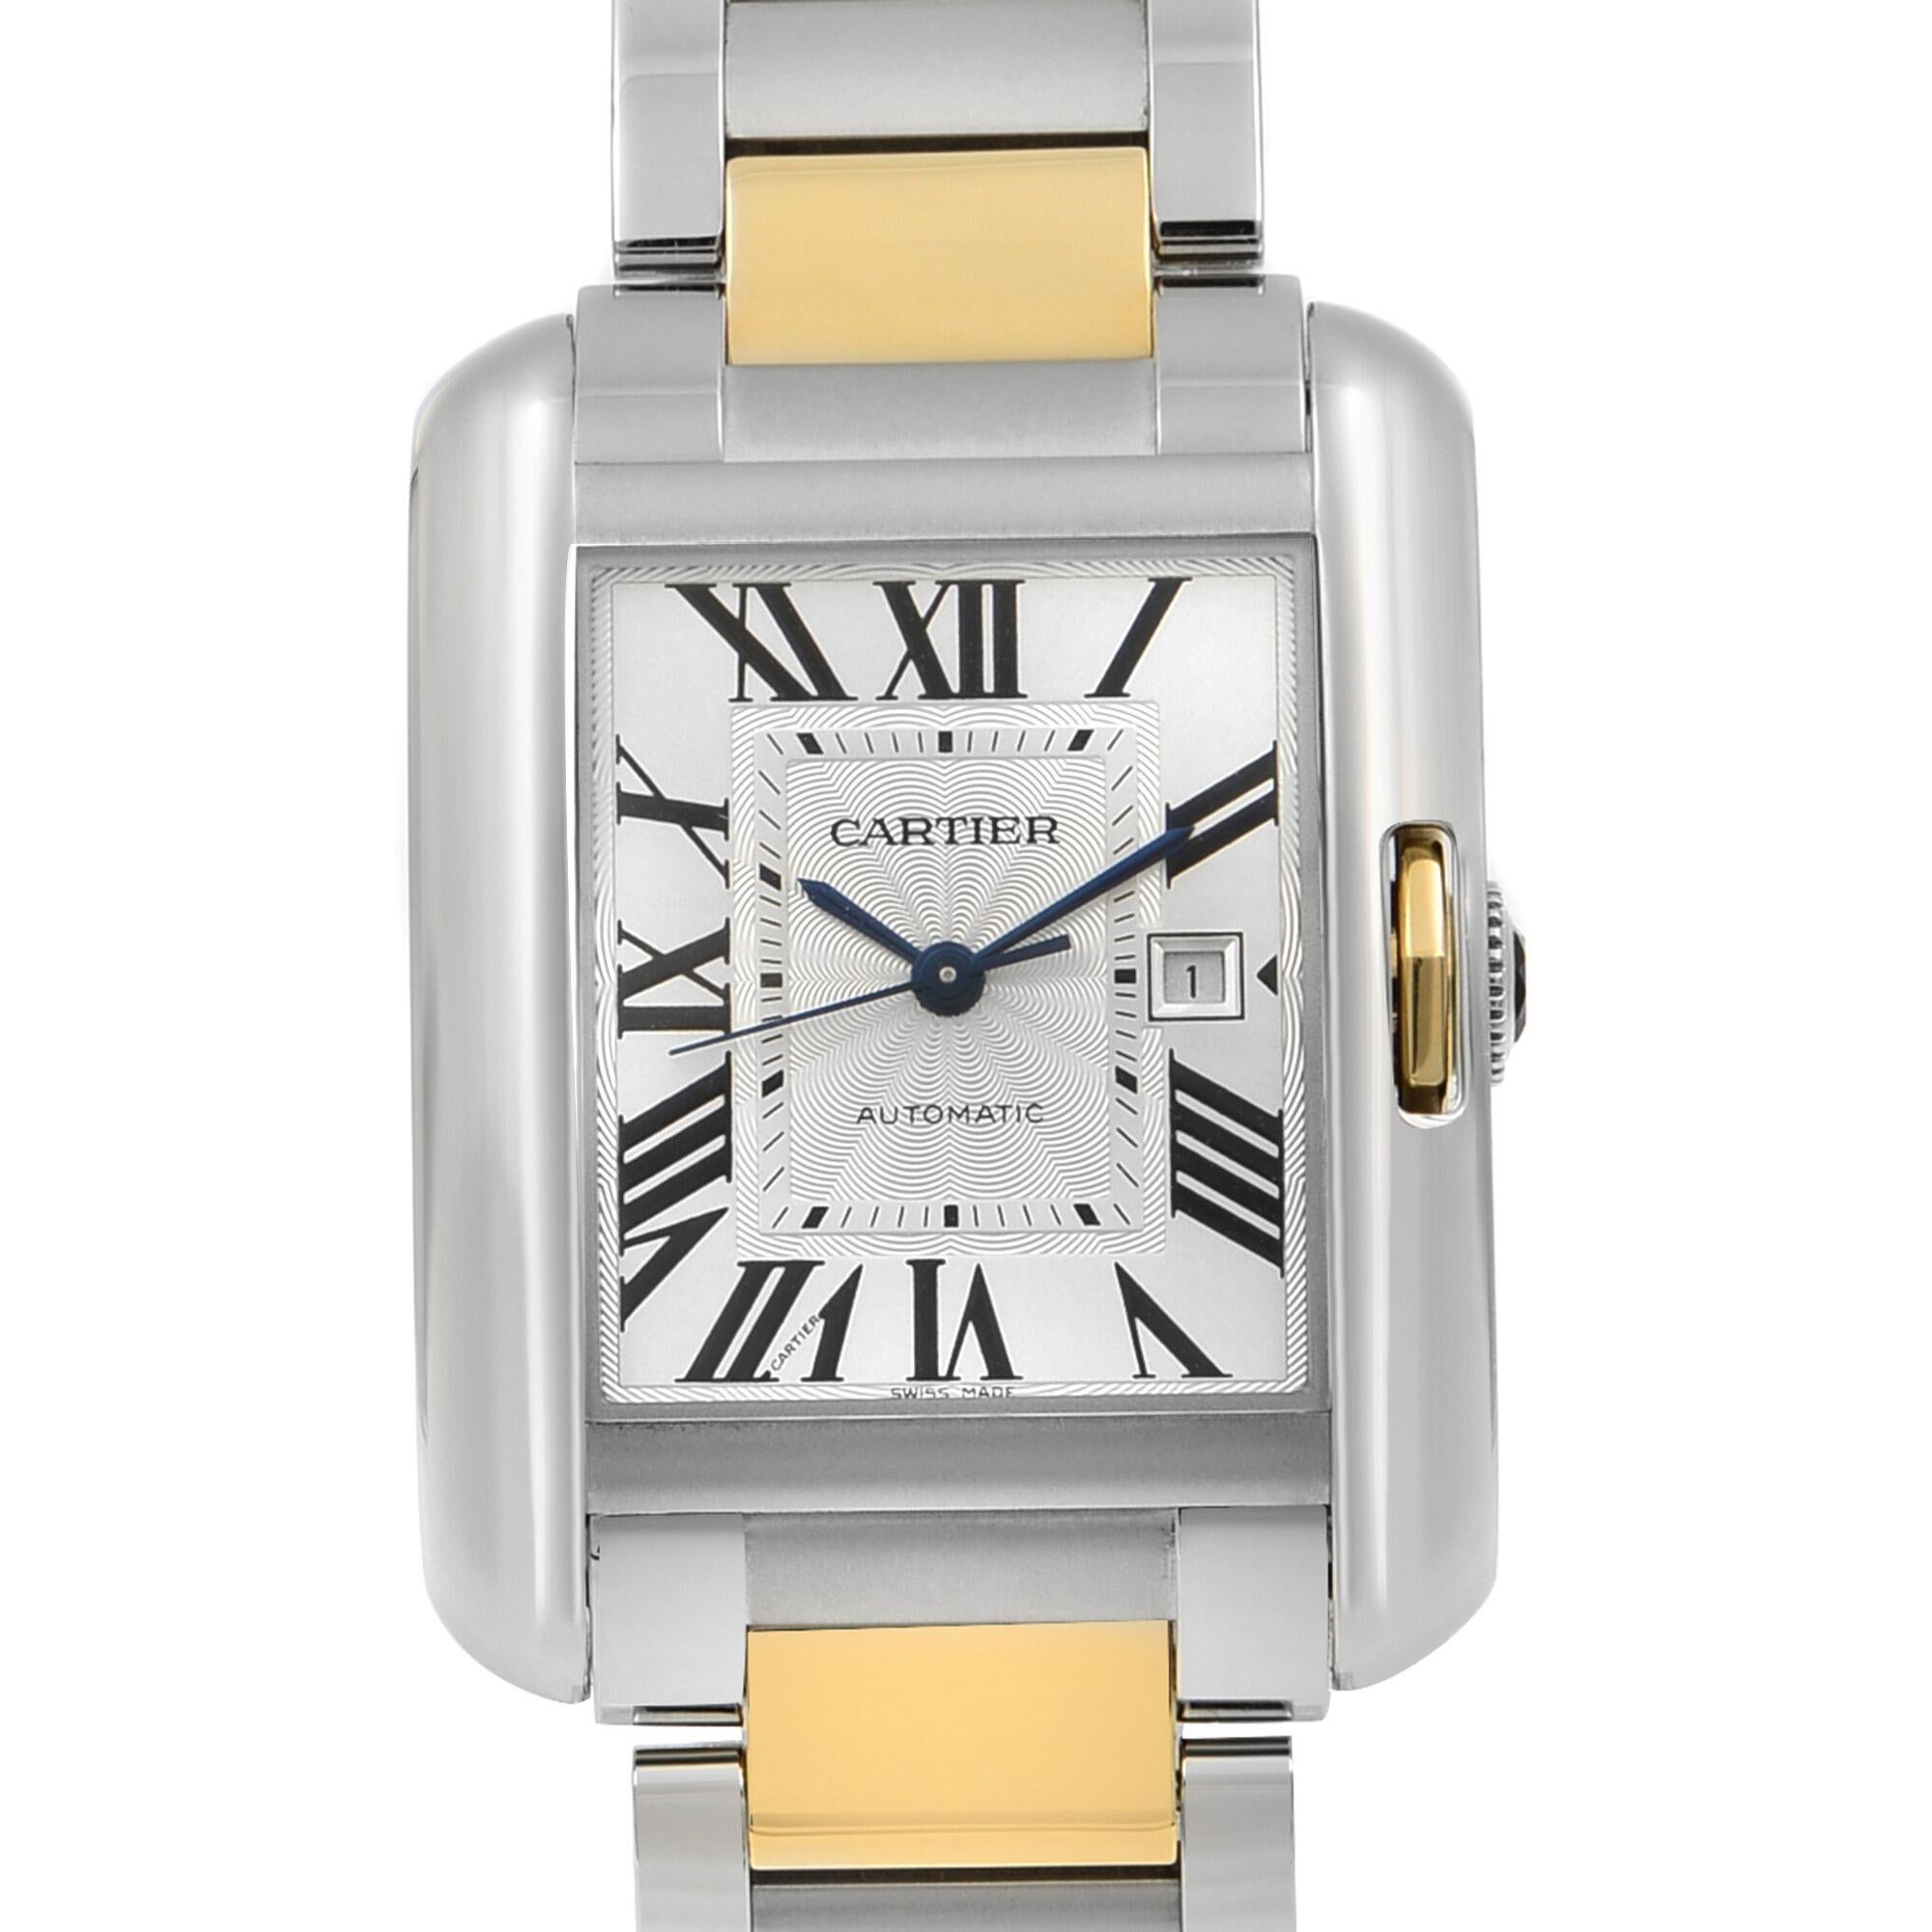 This pre-owned Cartier Tank W5310037 is a beautiful men's timepiece that is powered by mechanical (automatic) movement which is cased in a stainless steel case. It has a round shape face, date indicator dial and has hand roman numerals style